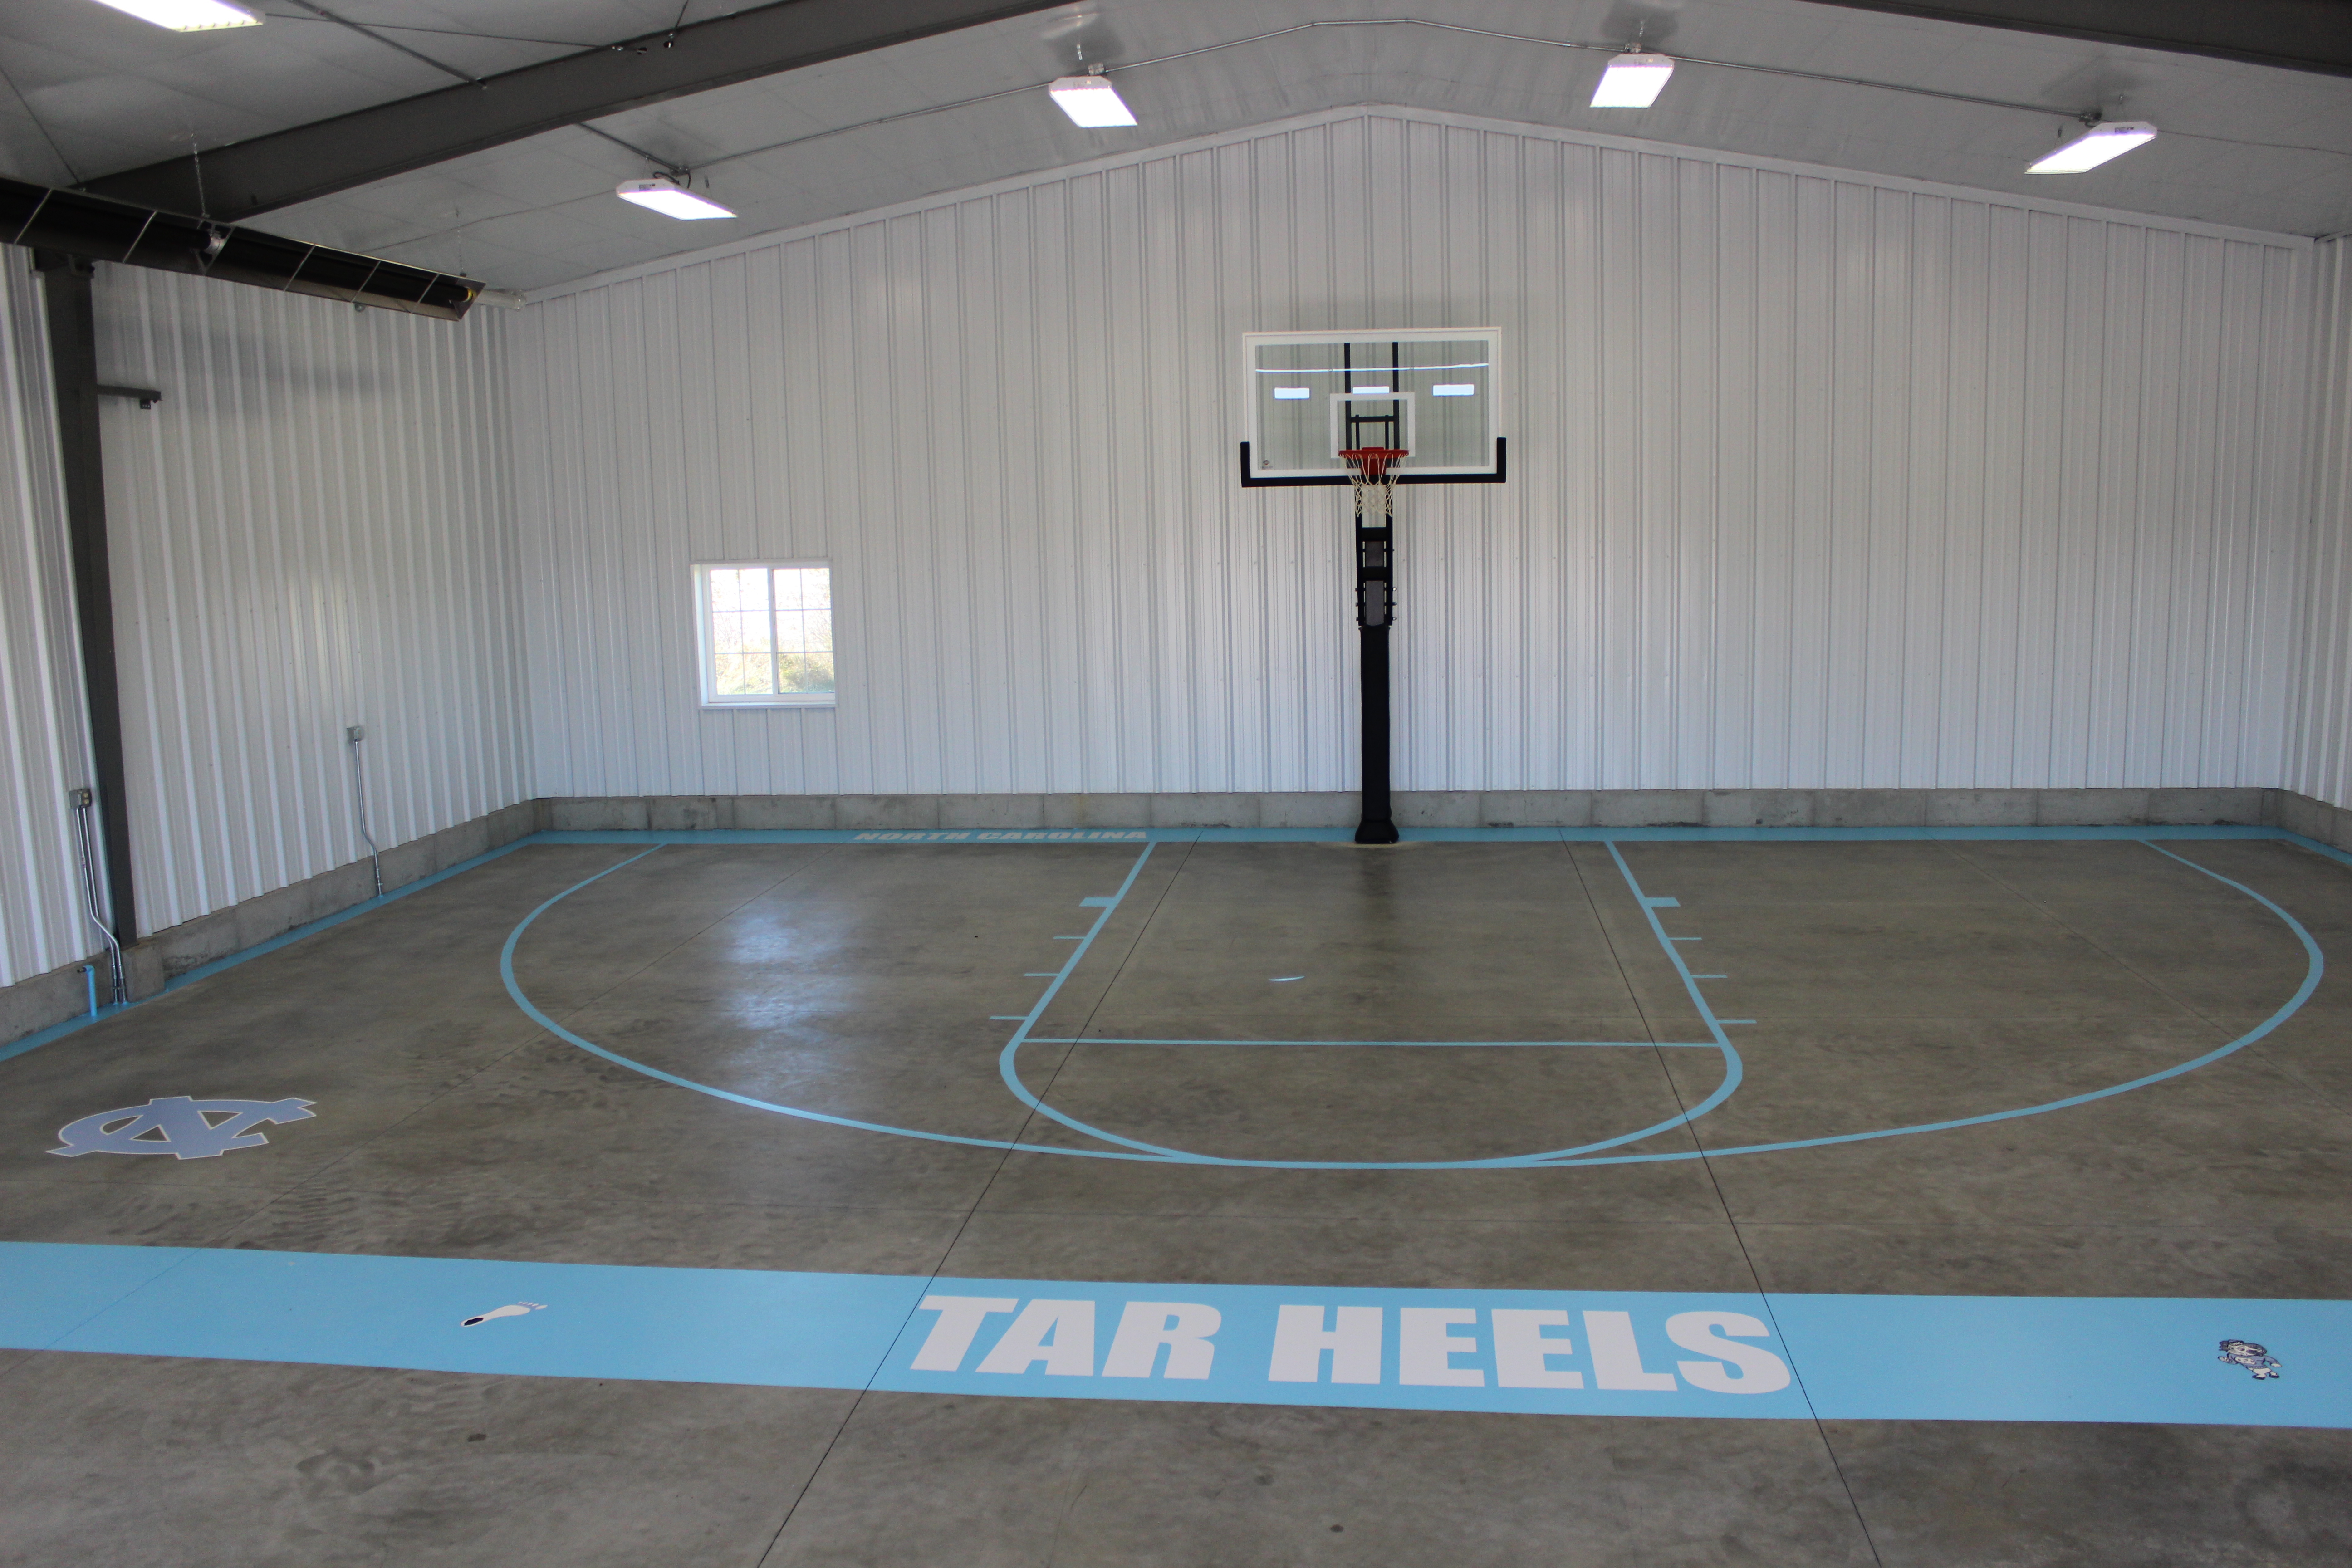 This Pro Dunk Platinum Basketball System Sits In An Indoor Gym On